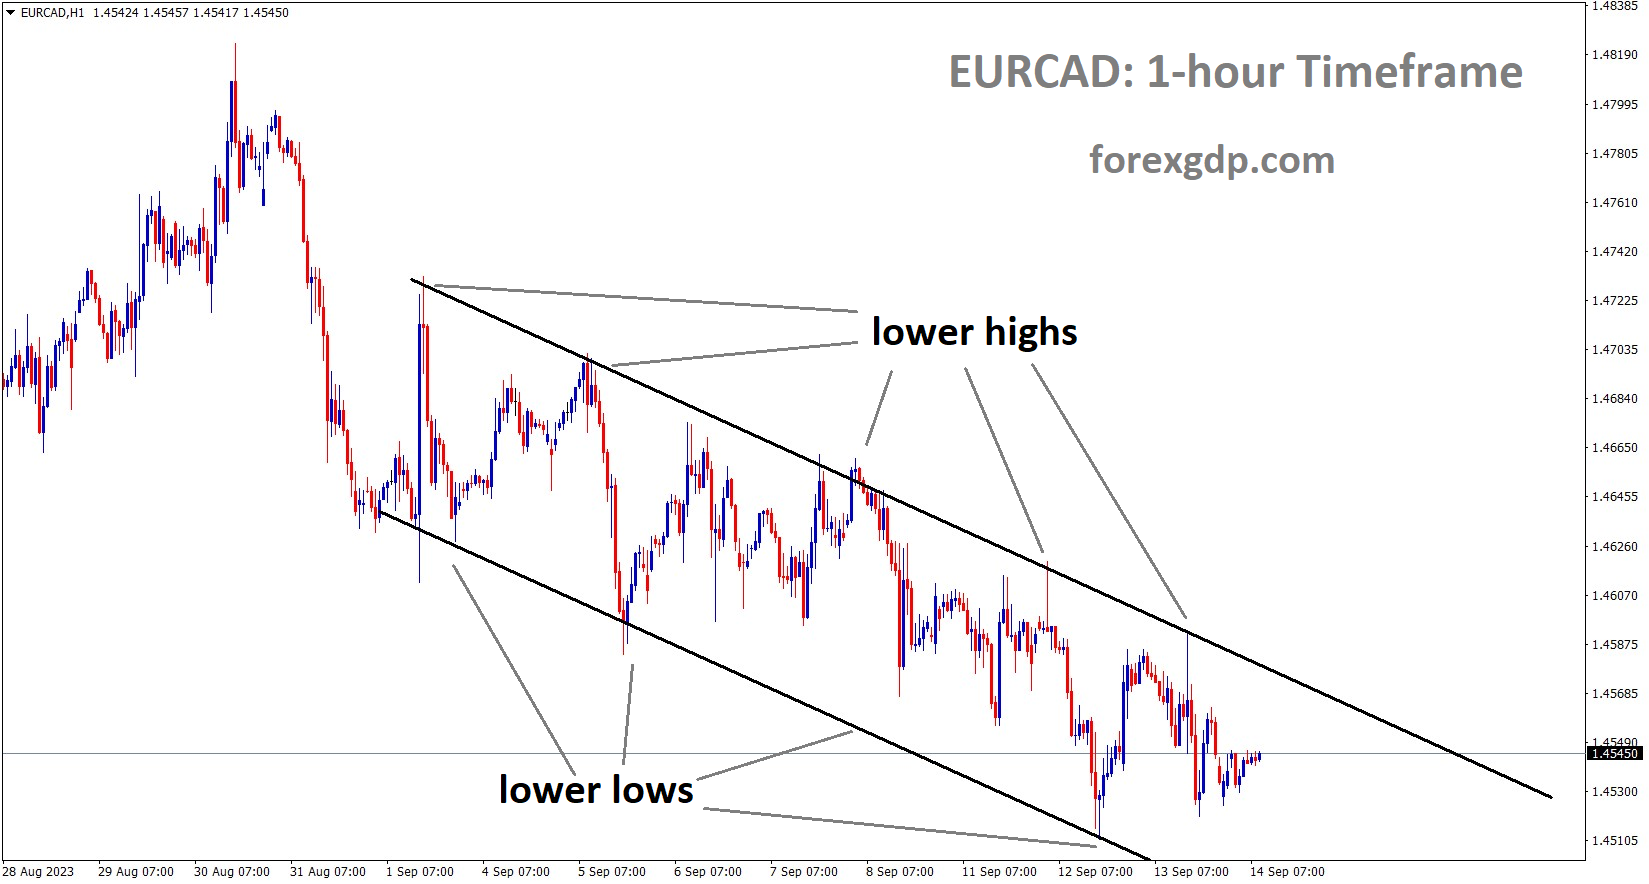 EURCAD H1 TF Analysis Market is moving in the Descending channel and the market has fallen from the lower high area of the channel